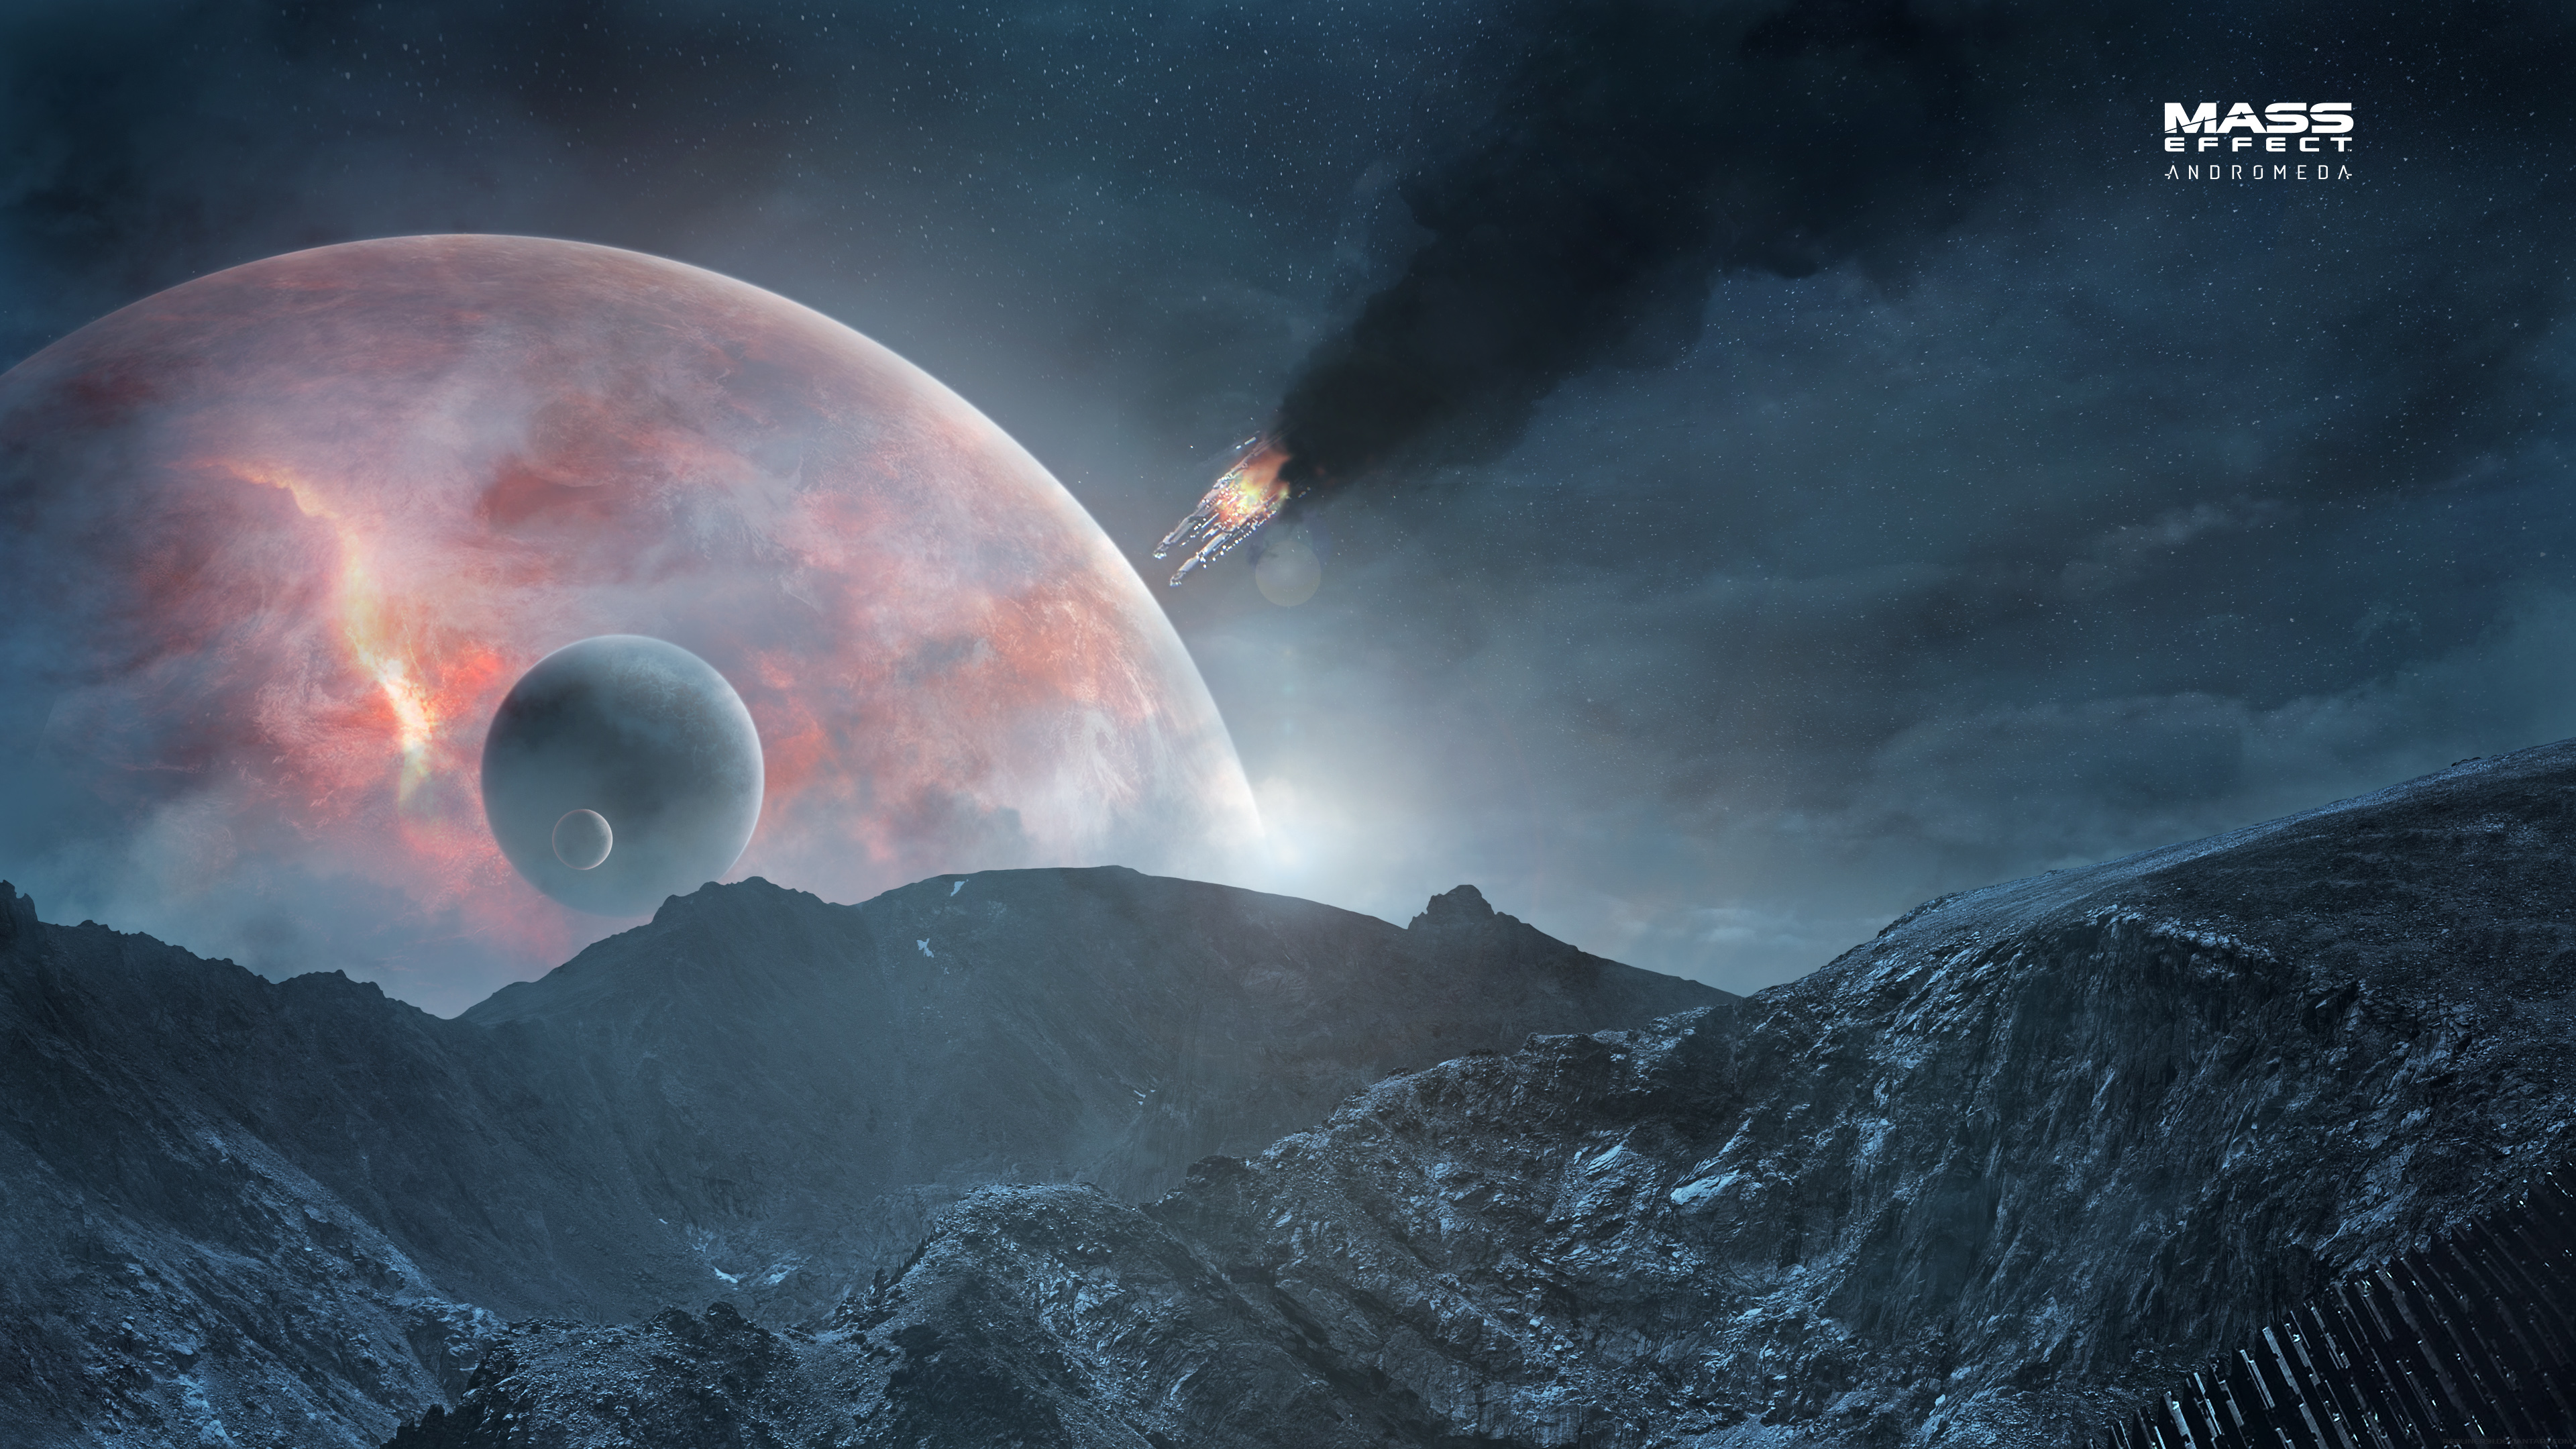 Mass Effect Mass Effect Andromeda Mountain Planet Sci Fi Spaceship Video Game 3840x2160